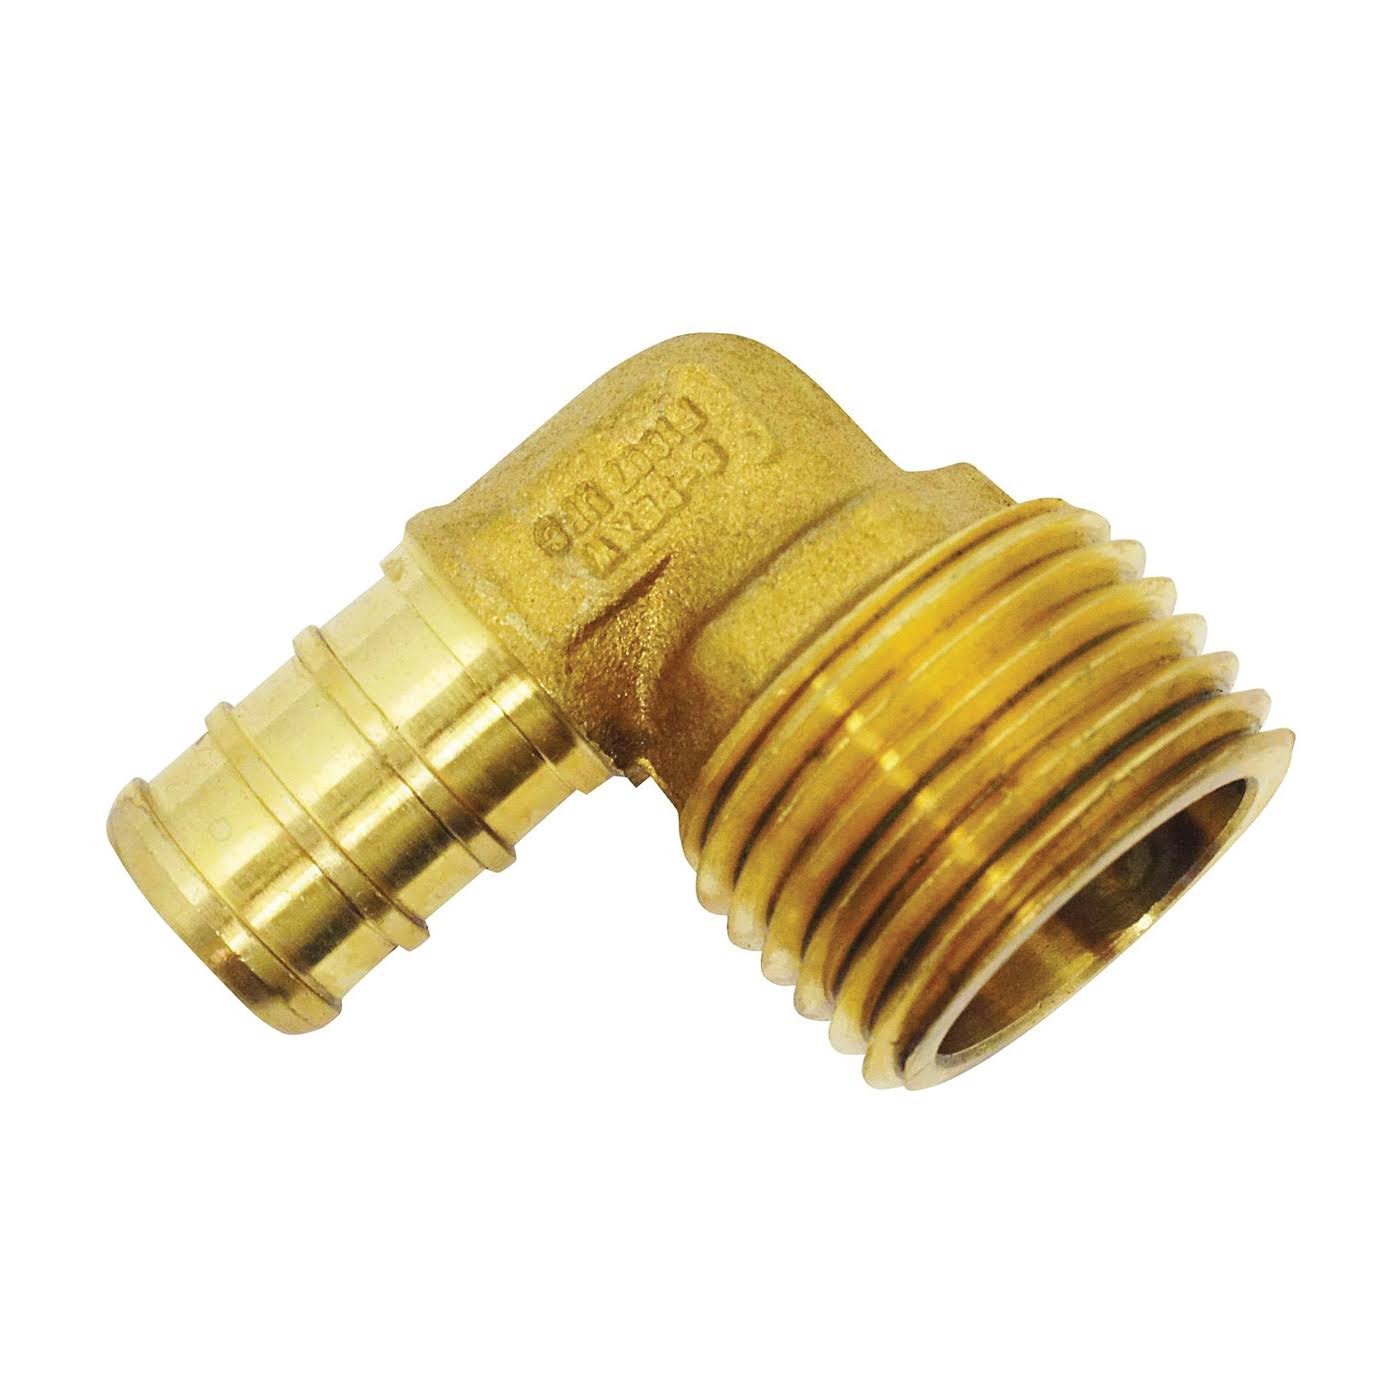 Apollo APXME12 Hose to Pipe Elbow Adapter - 1/2", Brass